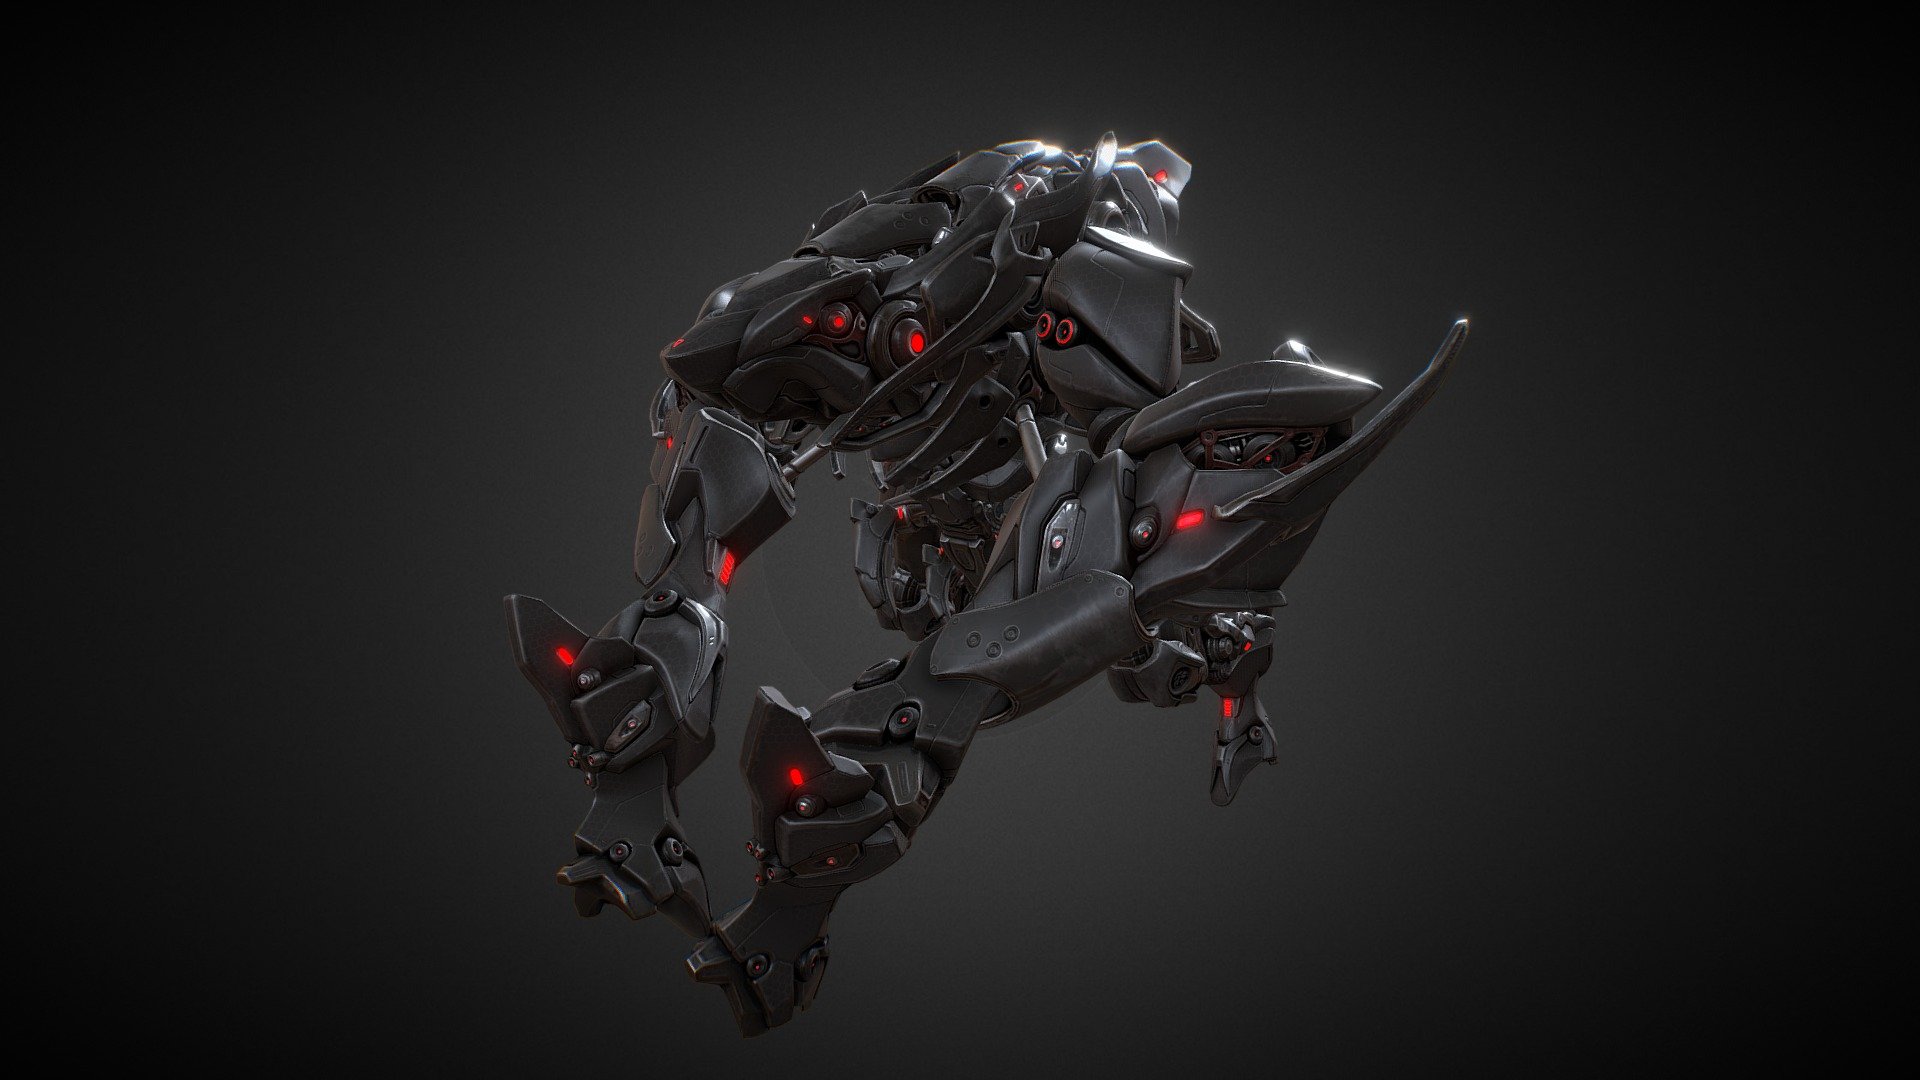 Humnx Anubis is the largest experimental drone mech found at Genesis Base, capable of leveling a whole USFF base.  This mech was created as a concept enemy for PVE, may be implemented in the future.

https://archangelgame.com/ - Humnx Anubis - 3D model by Archangel: Hellfire (@archangelgame) 3d model